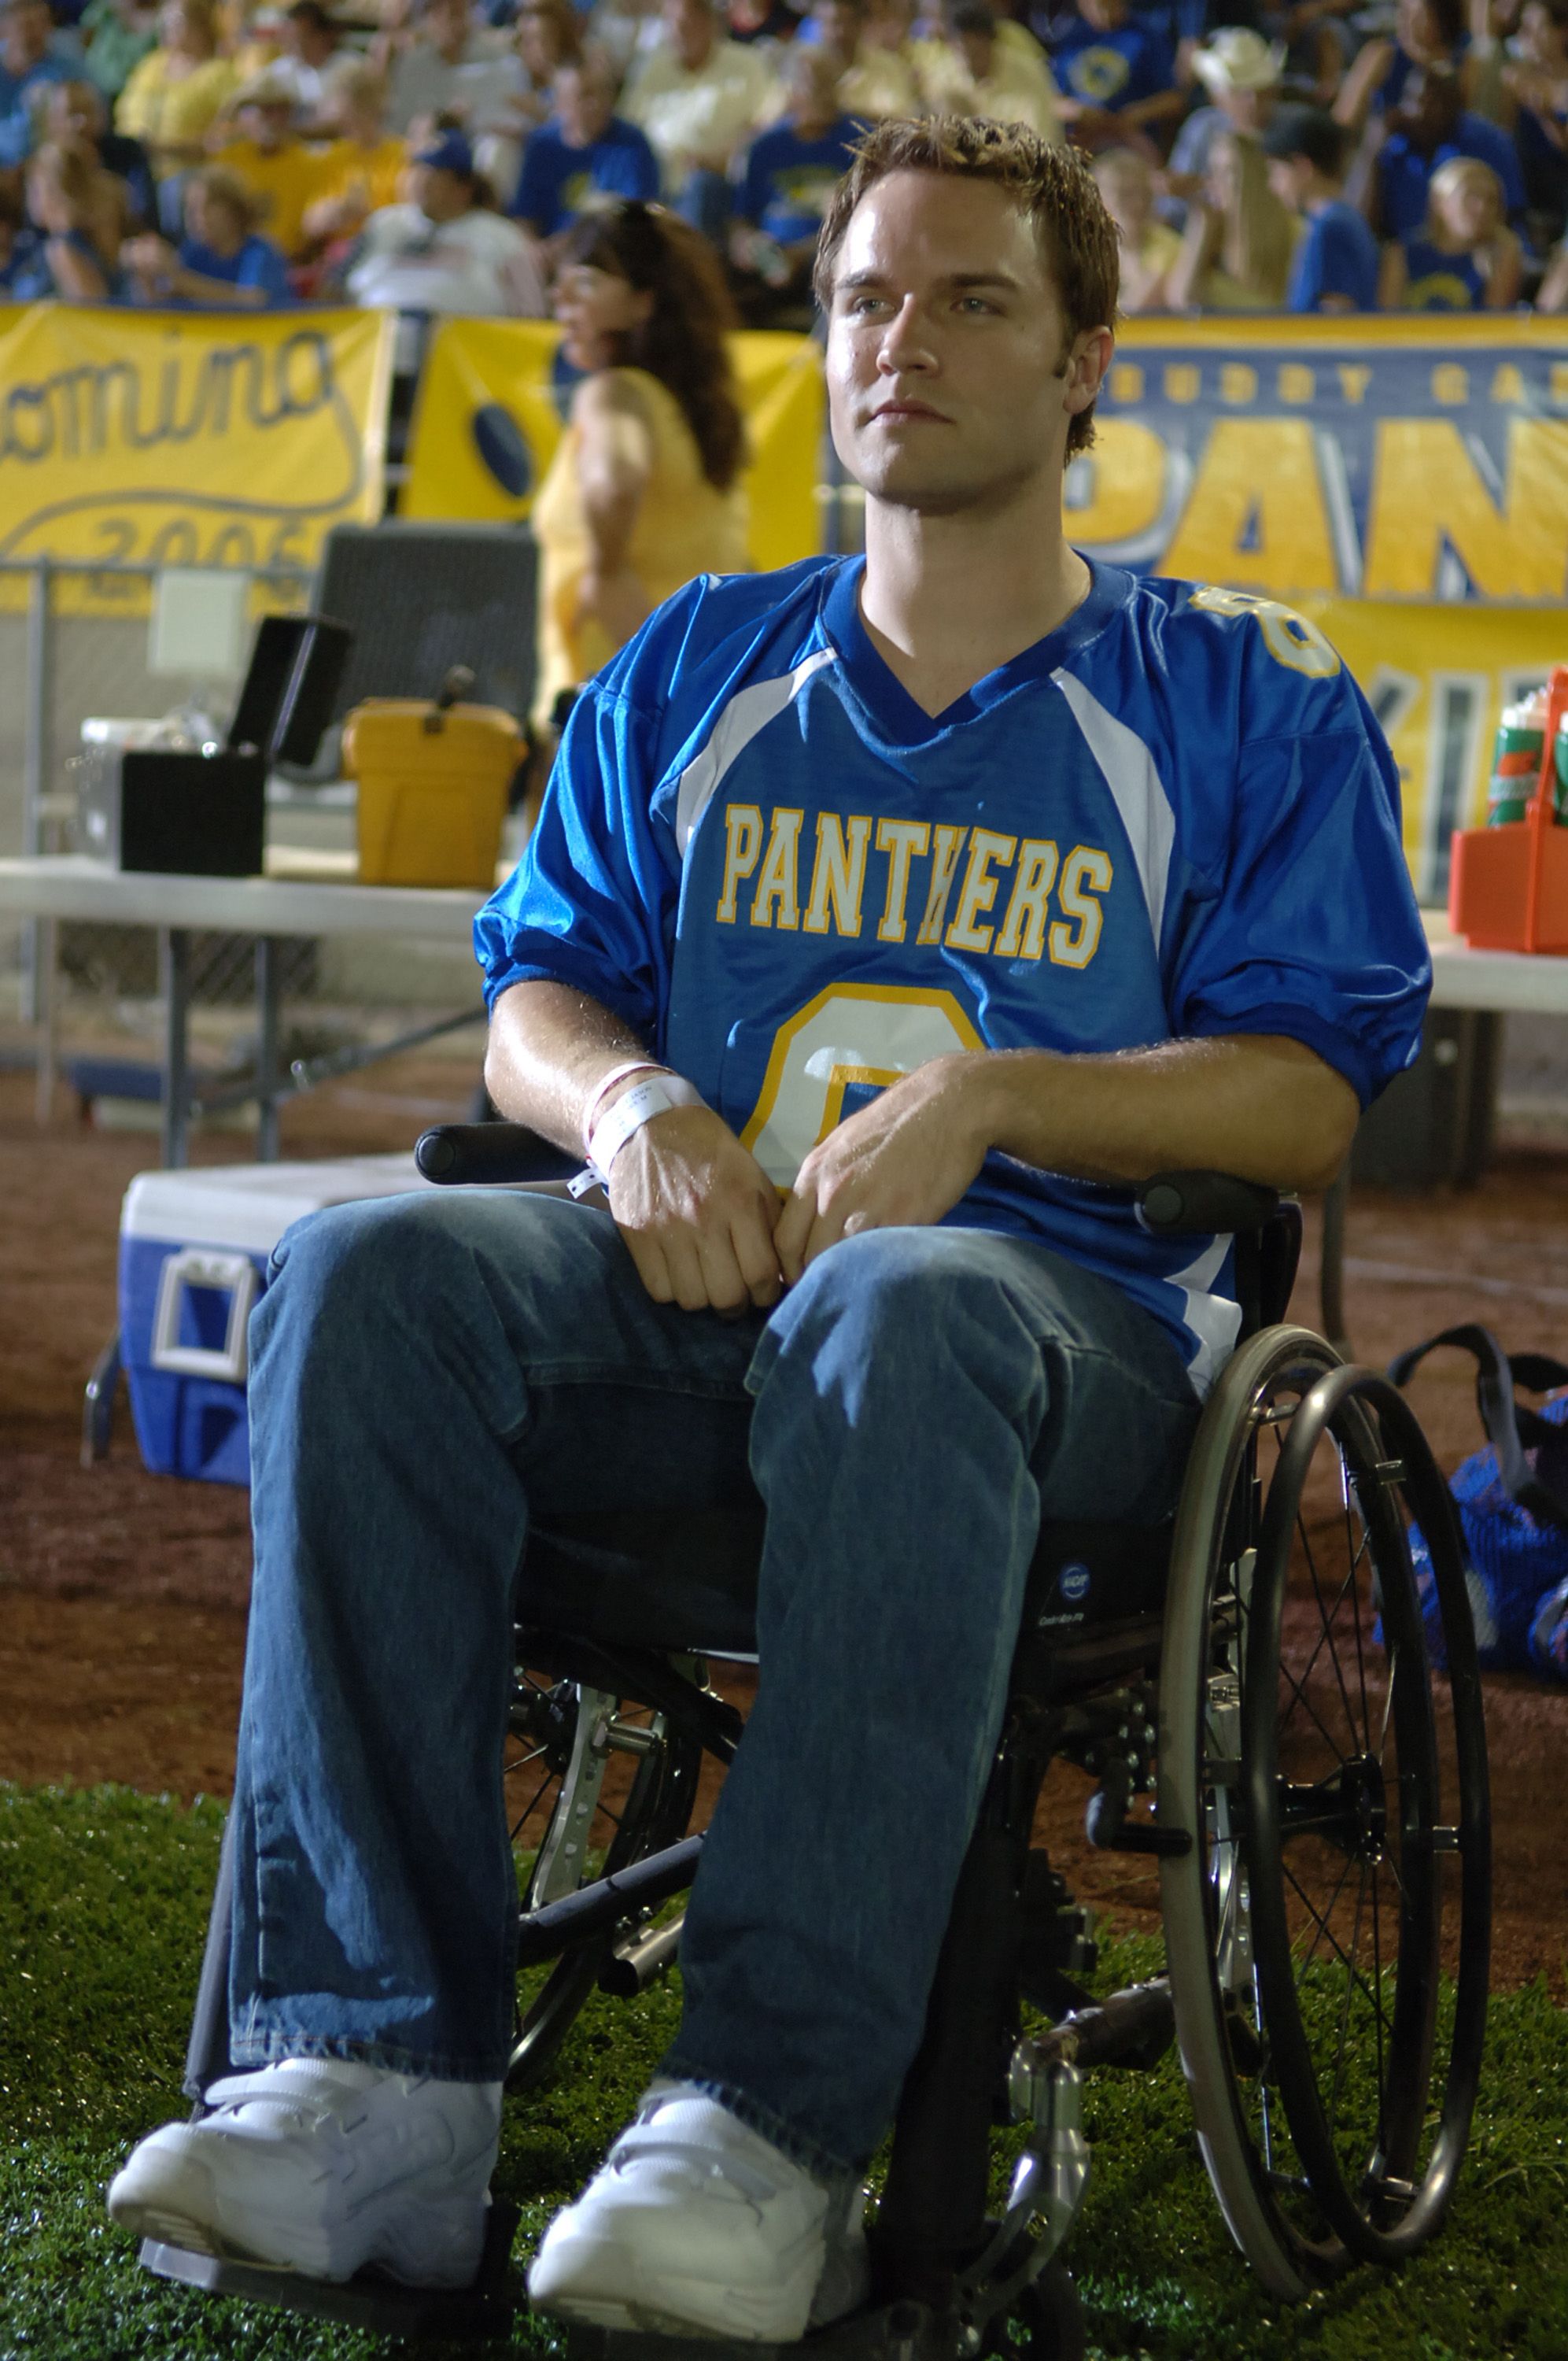 Friday Night Lights: Every Character Who Disappeared